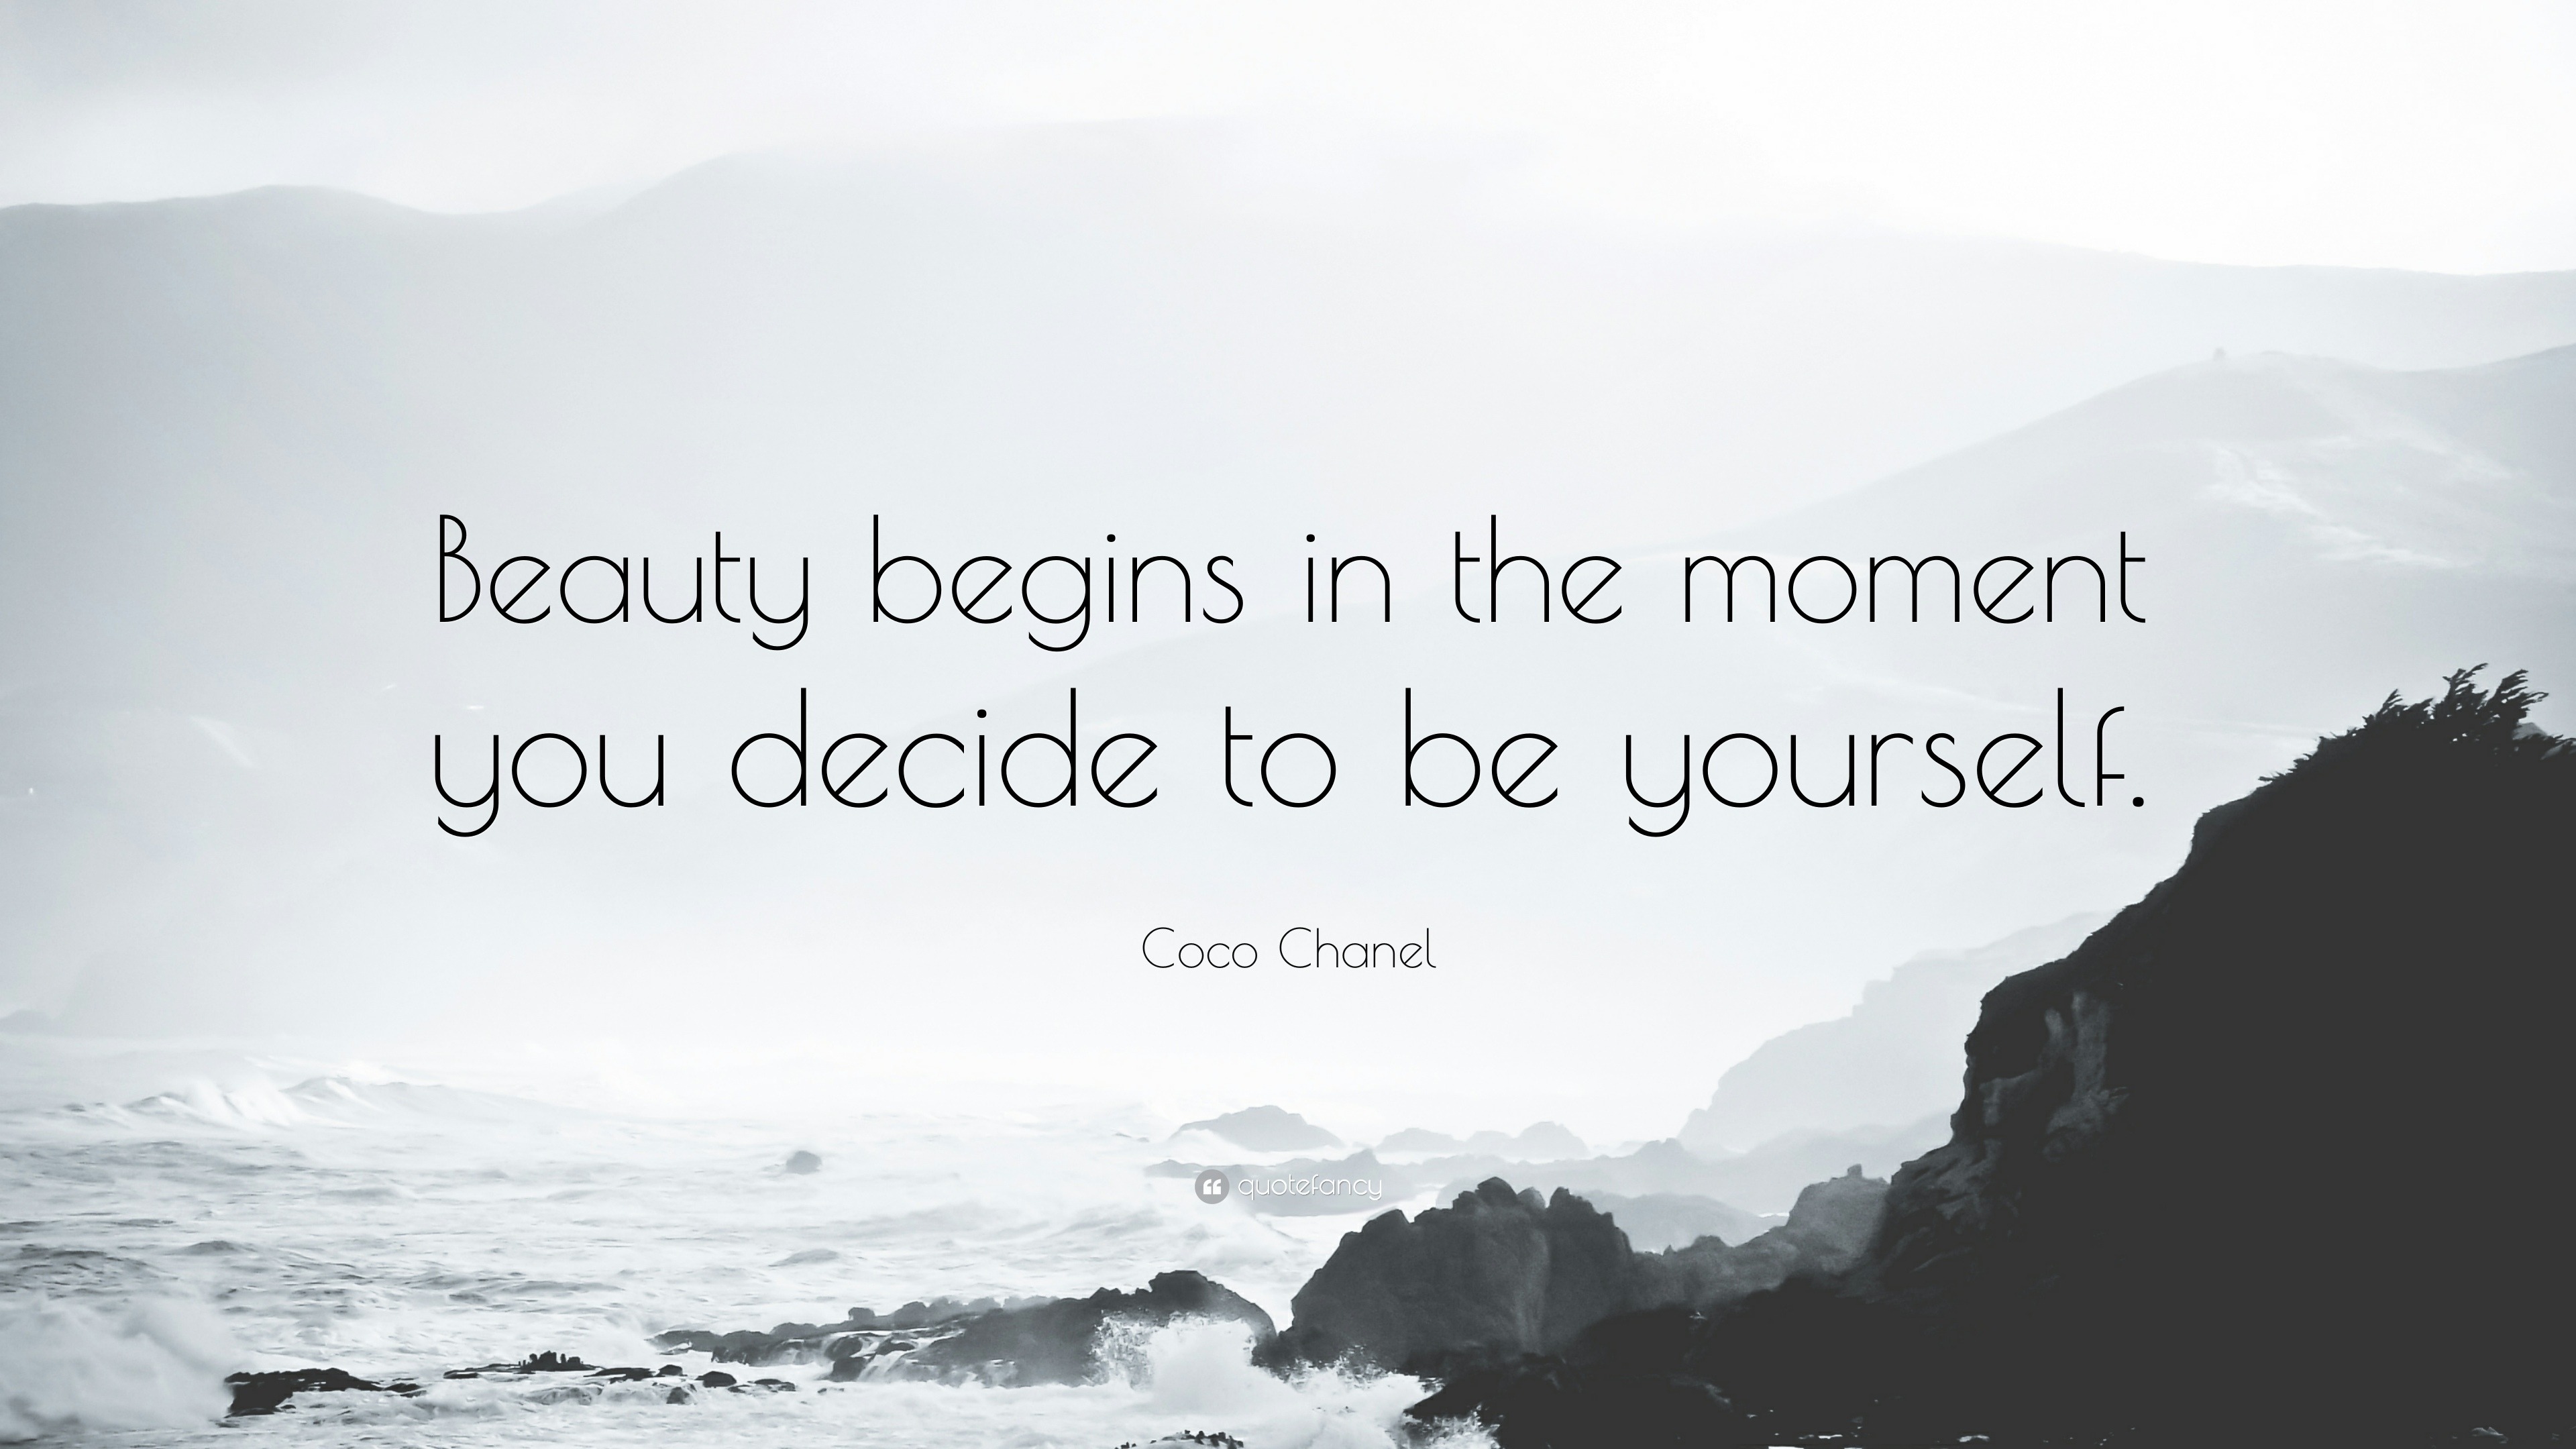 Coco Chanel Quote - Beauty begins the moment you decide to be yourself.